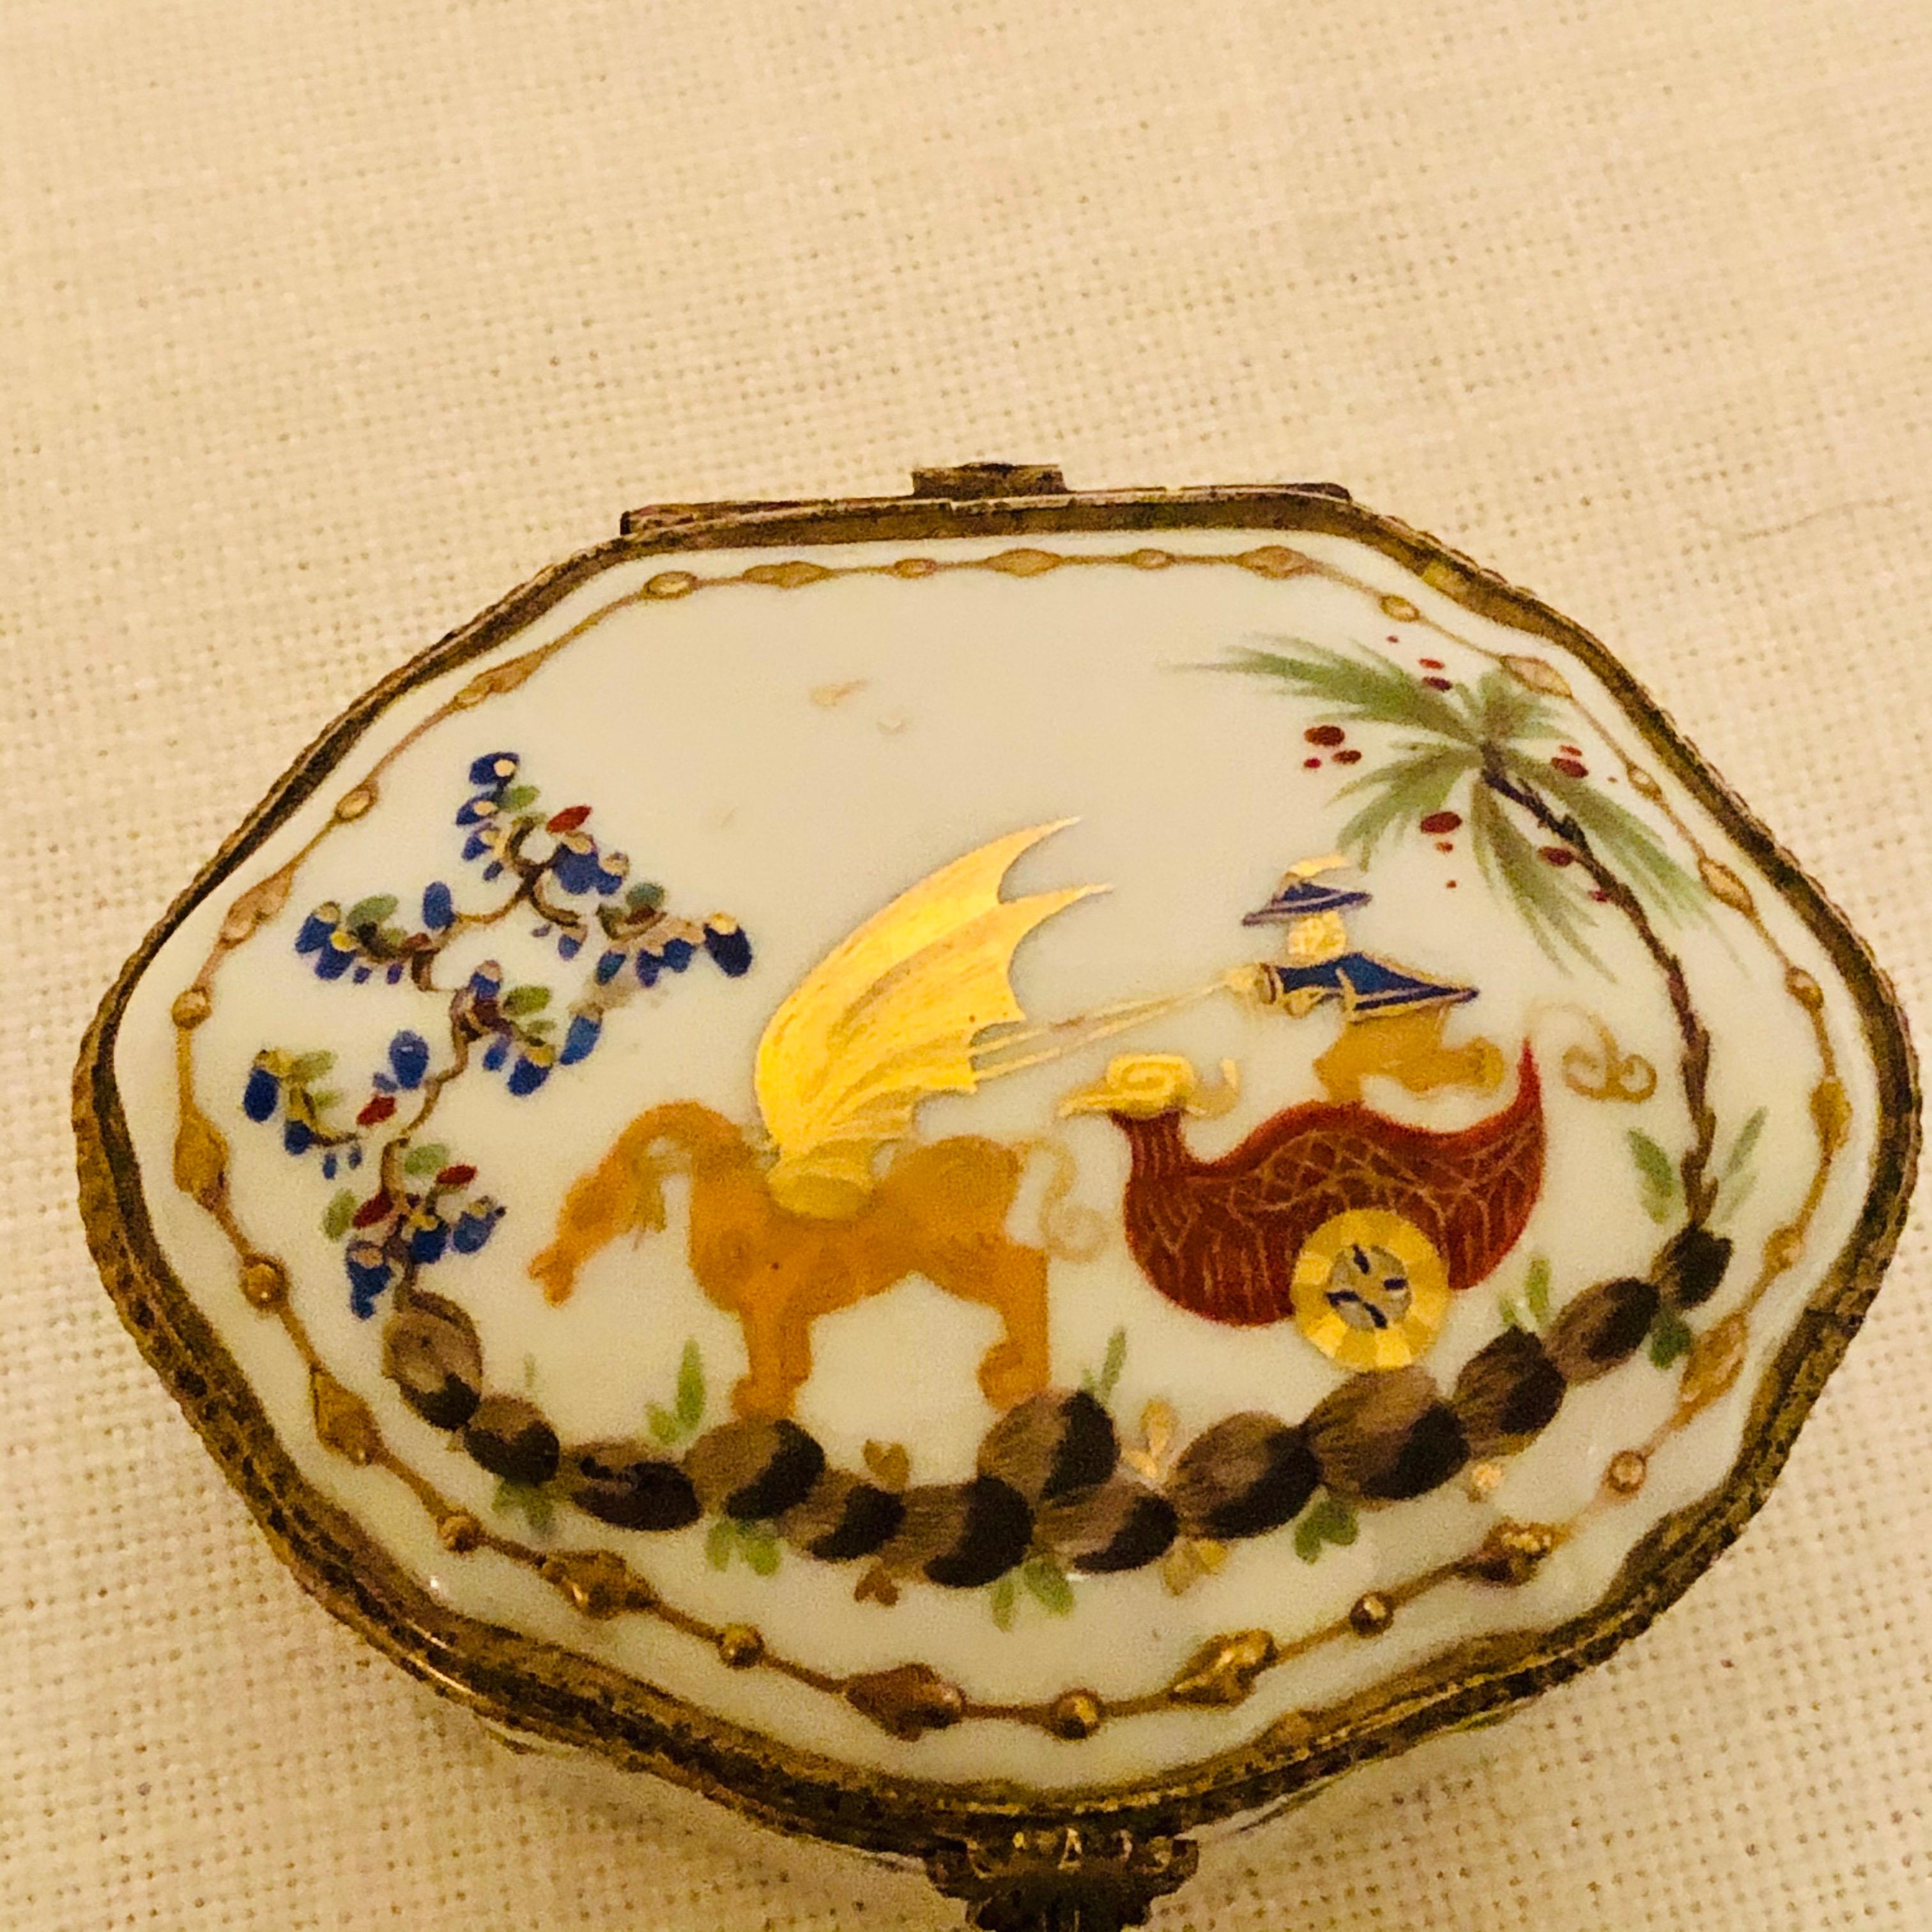 Le Tallec Porcelain Box Painted with a Whimsical Chinoiserie Scene 2